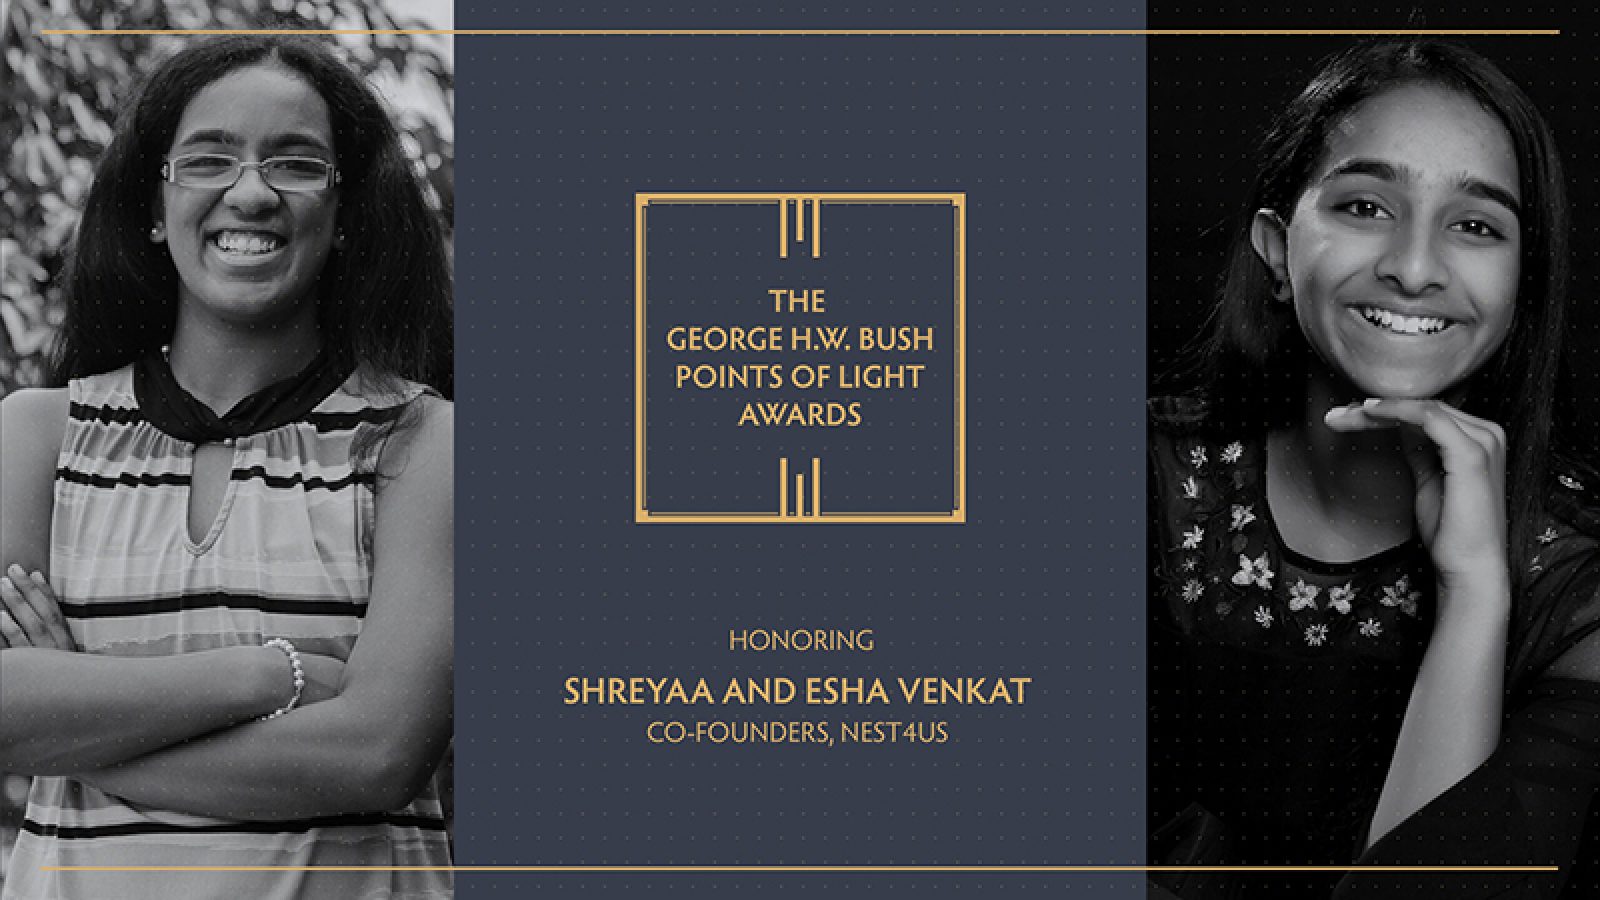 Shreyaa and Esha Venkat with the words The George H.W. Bush Points of Light Awards honoring Shreyaa and Esha Venkat, co-founders, NEST4US